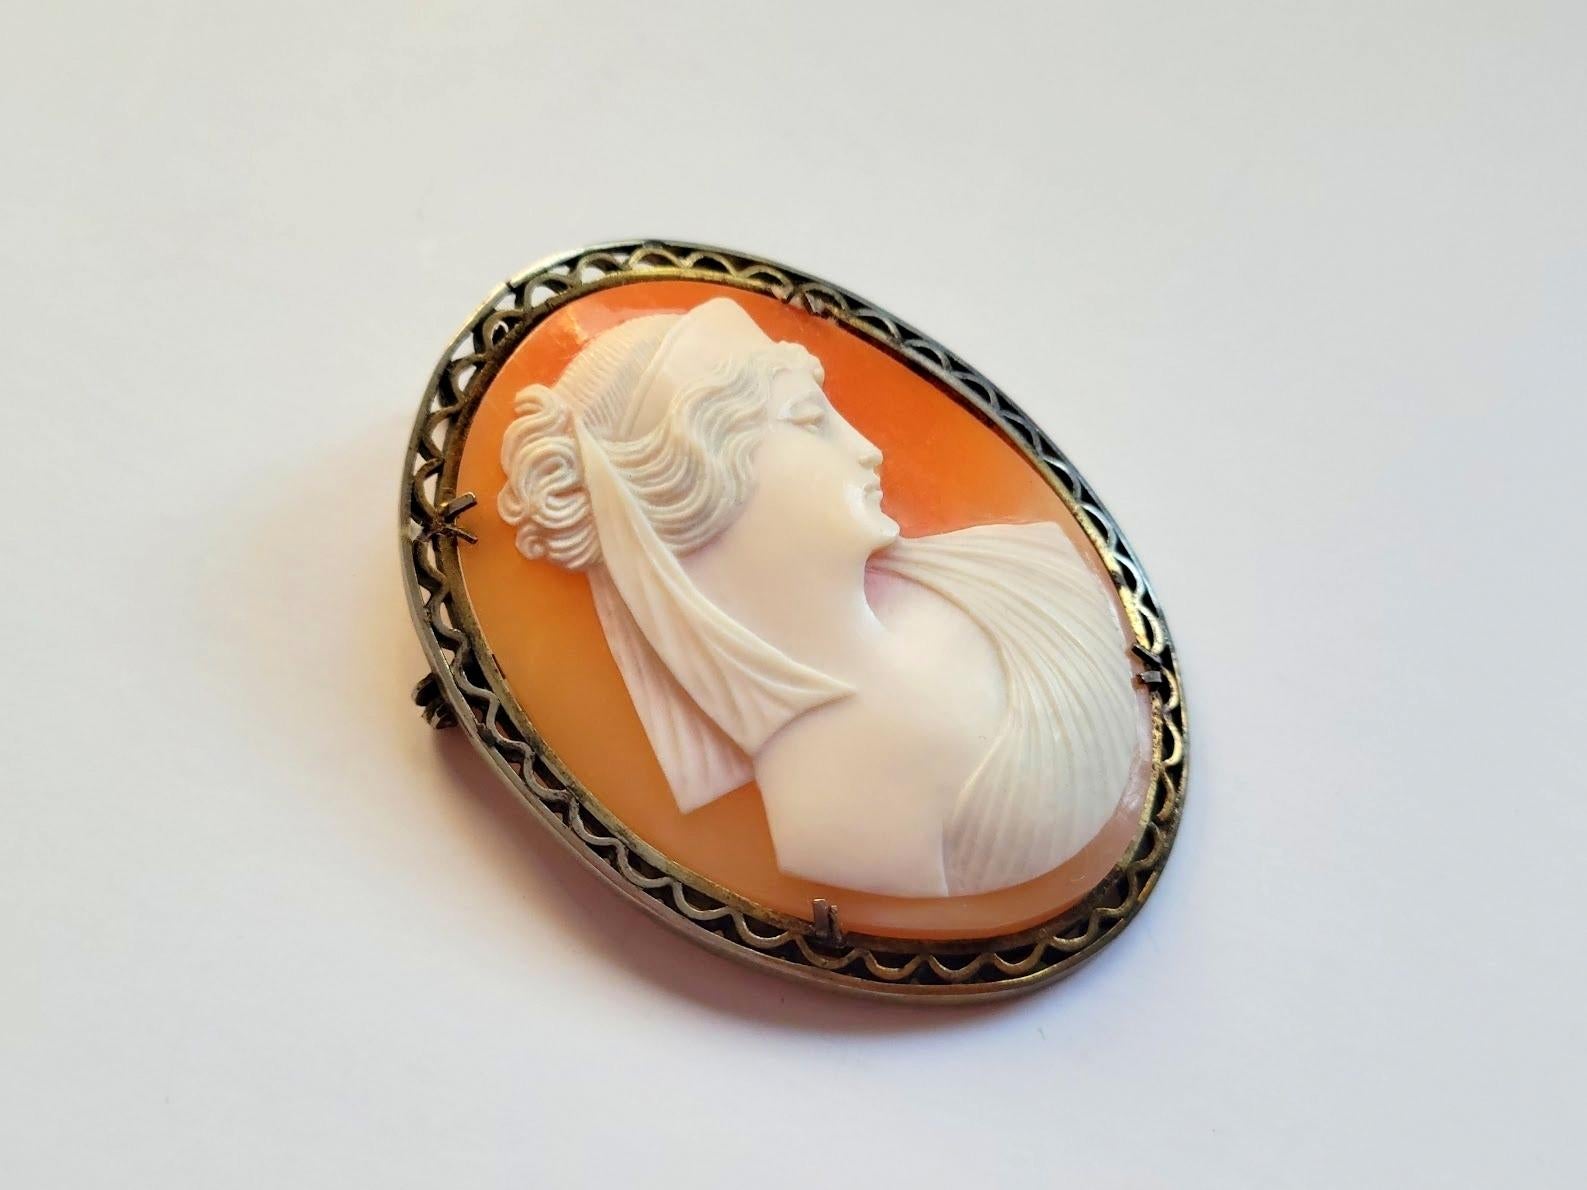 Victorian Cameo Brooch. Fabulous carved Victorian brooch made around the late 1800s. It depicts a beautiful portrait of a young lady. The execution of the shell is amazing, and the relief helps to add details and dimension to the design. The frame